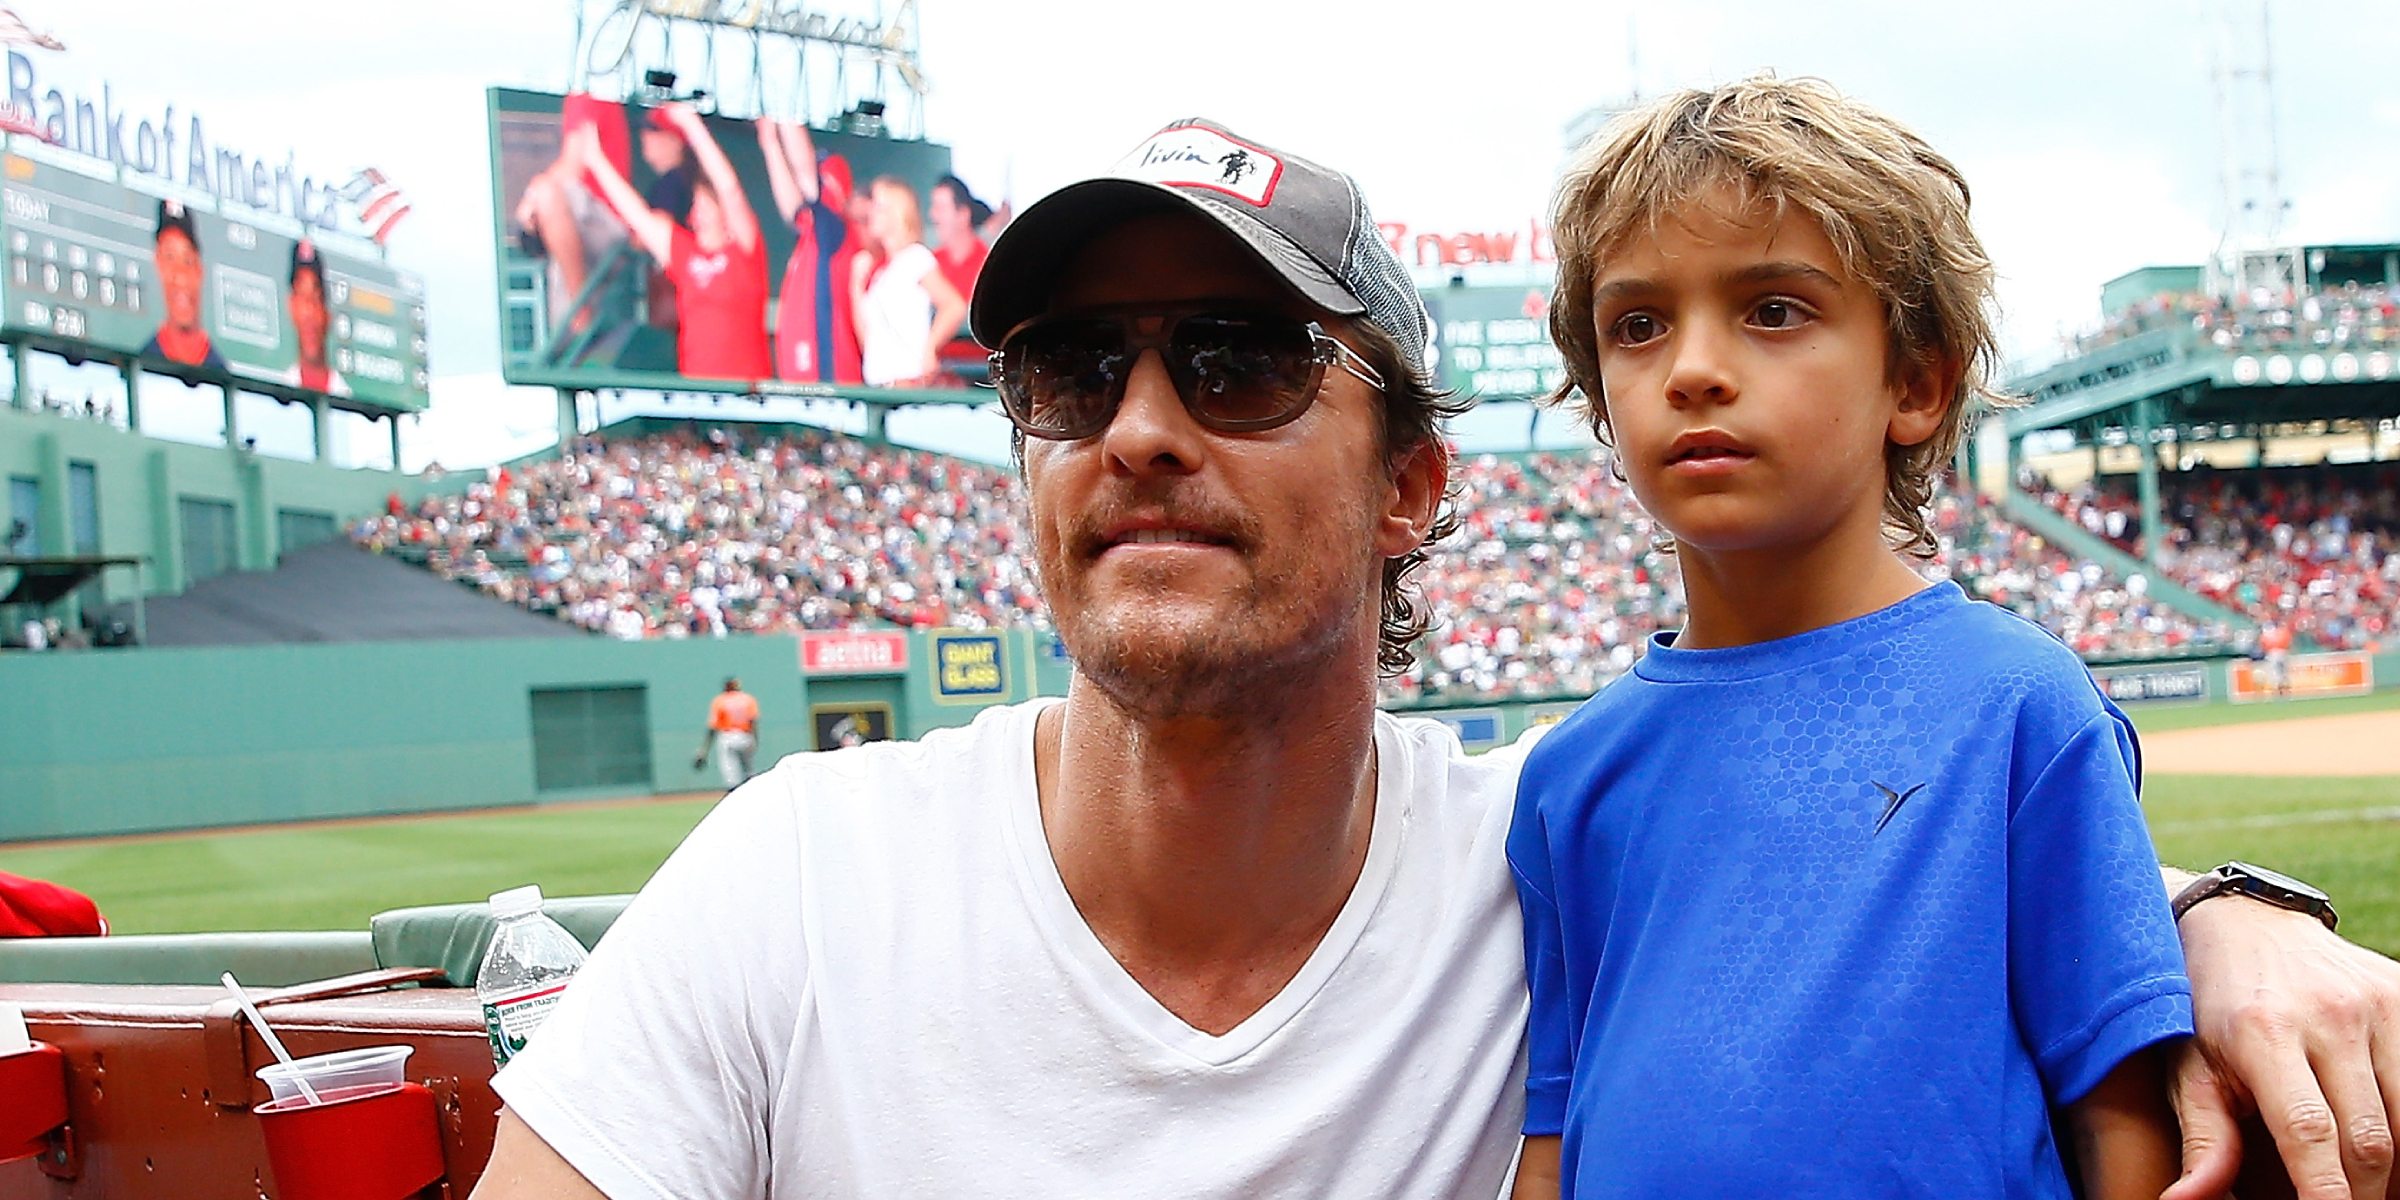 Matthew and Levi McConaughey | Source: Getty Images